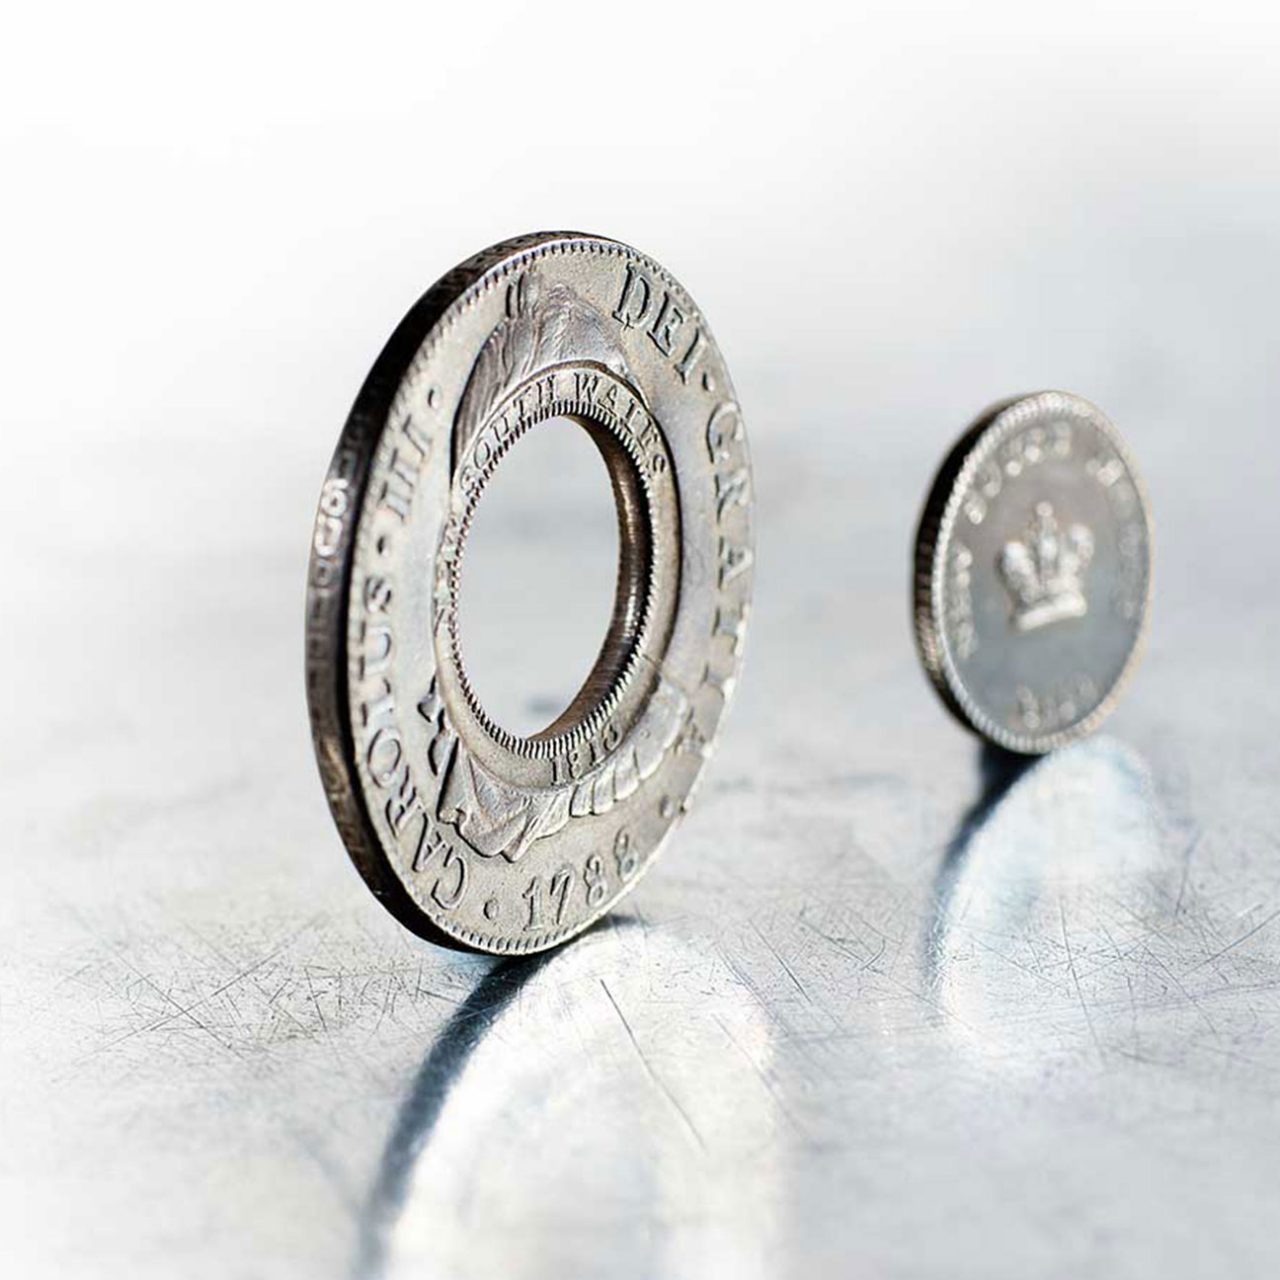 The holey dollar, a flat, doughnut-shaped silver coin, and small coin known as a 'dump'